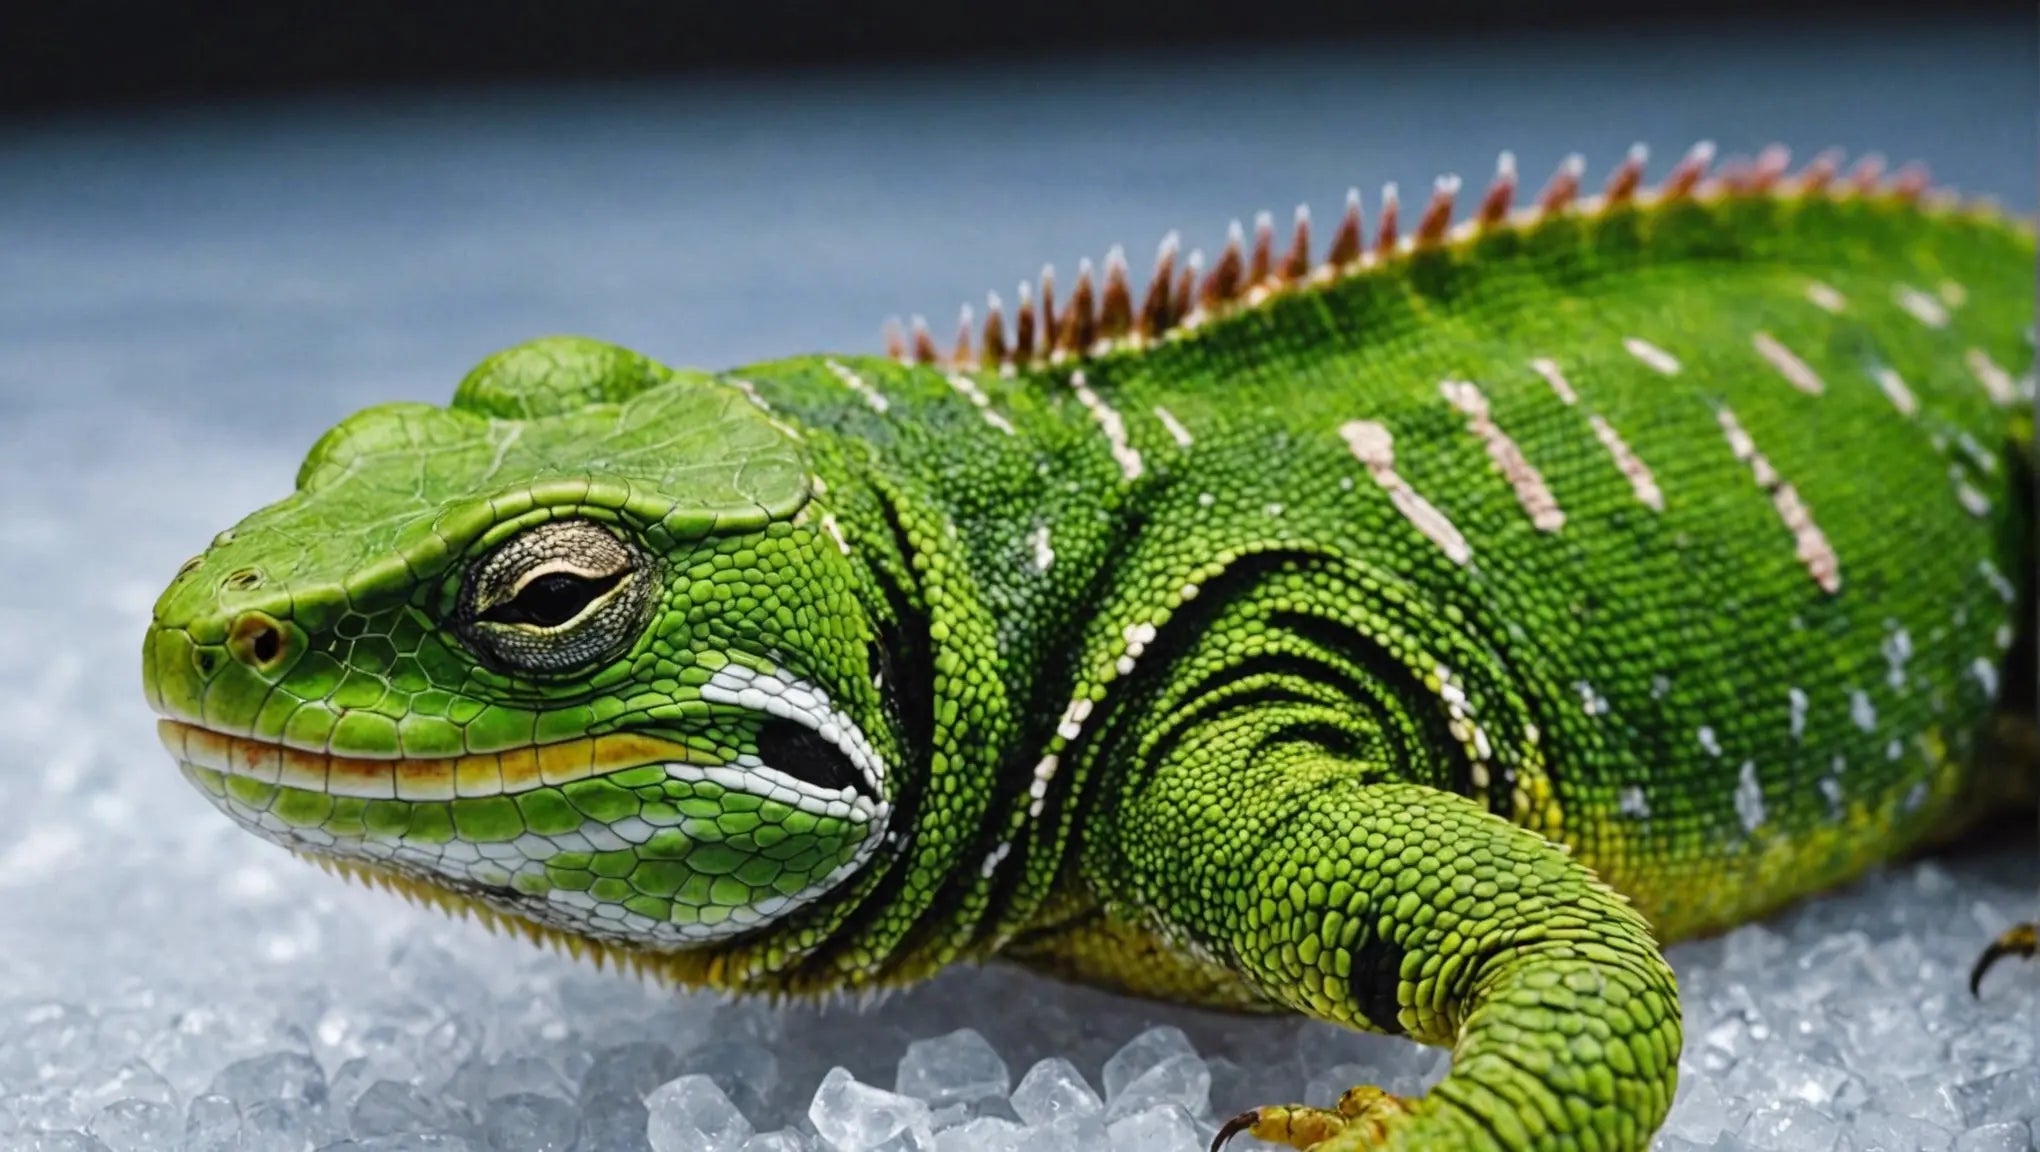 Feeding Your Reptile: The Benefits of Frozen Food